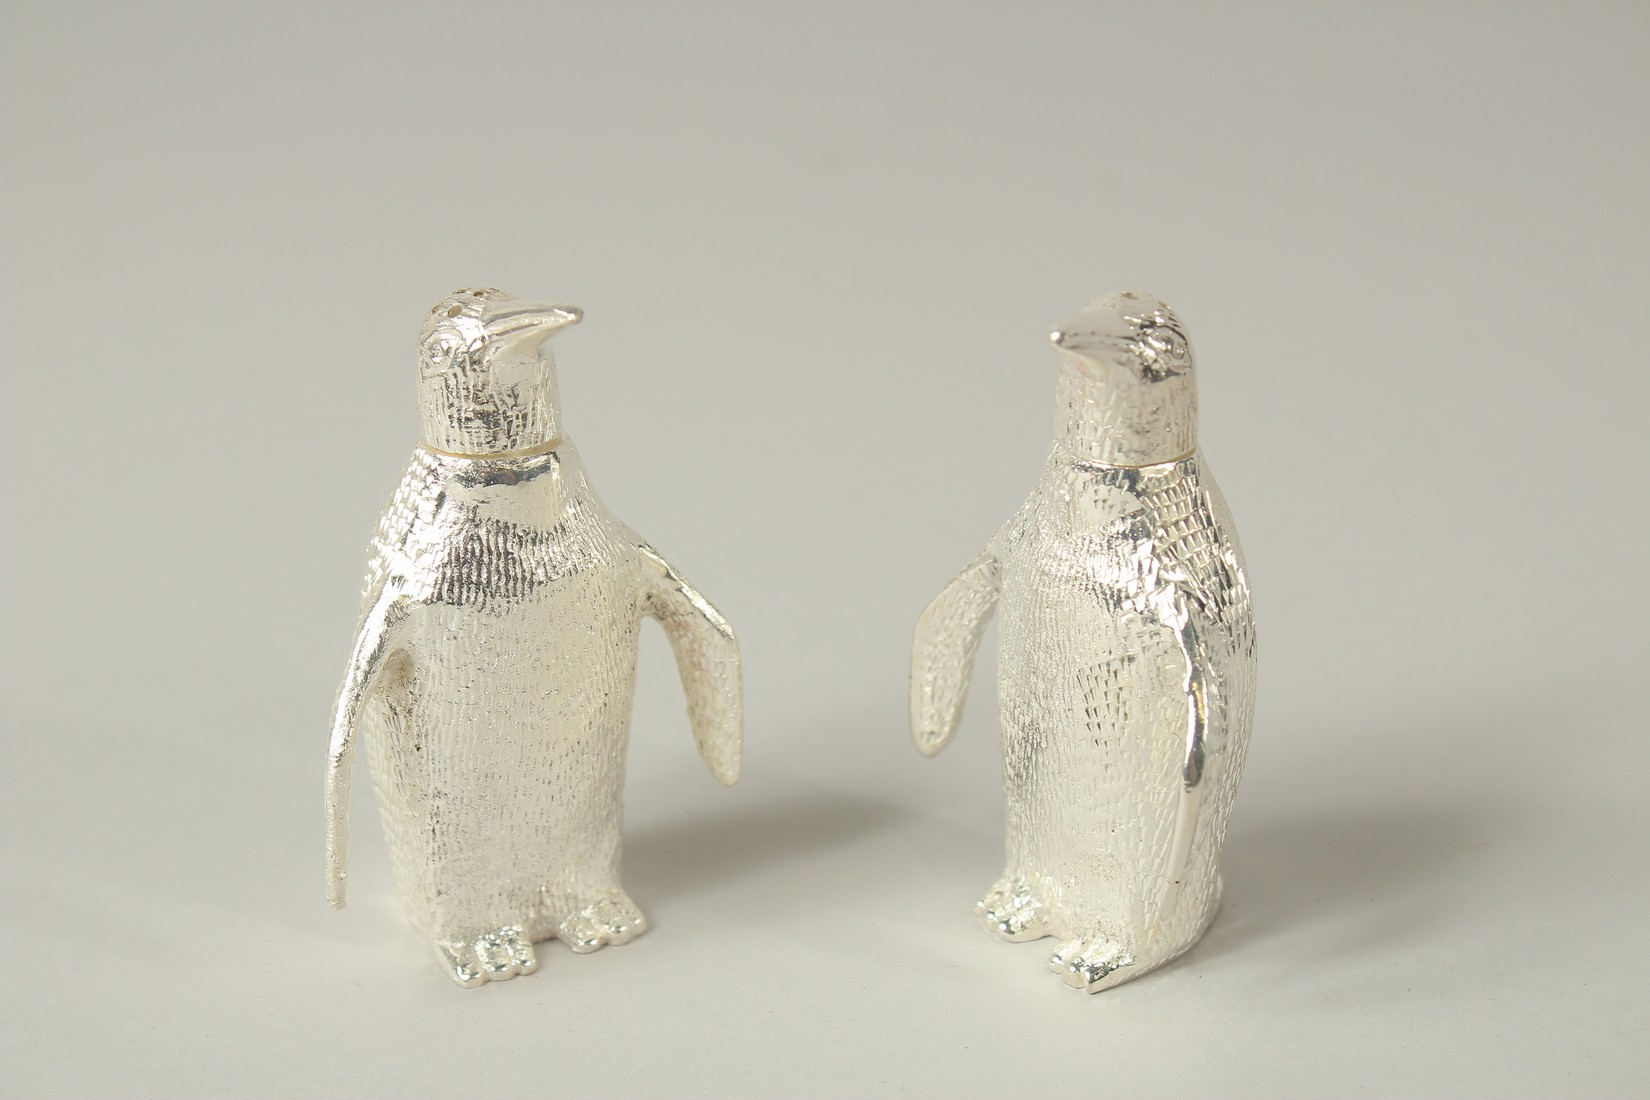 A SMALL PAIR OF PLATED PENGUIN SALTS AND PEPPERS. 3cms high.